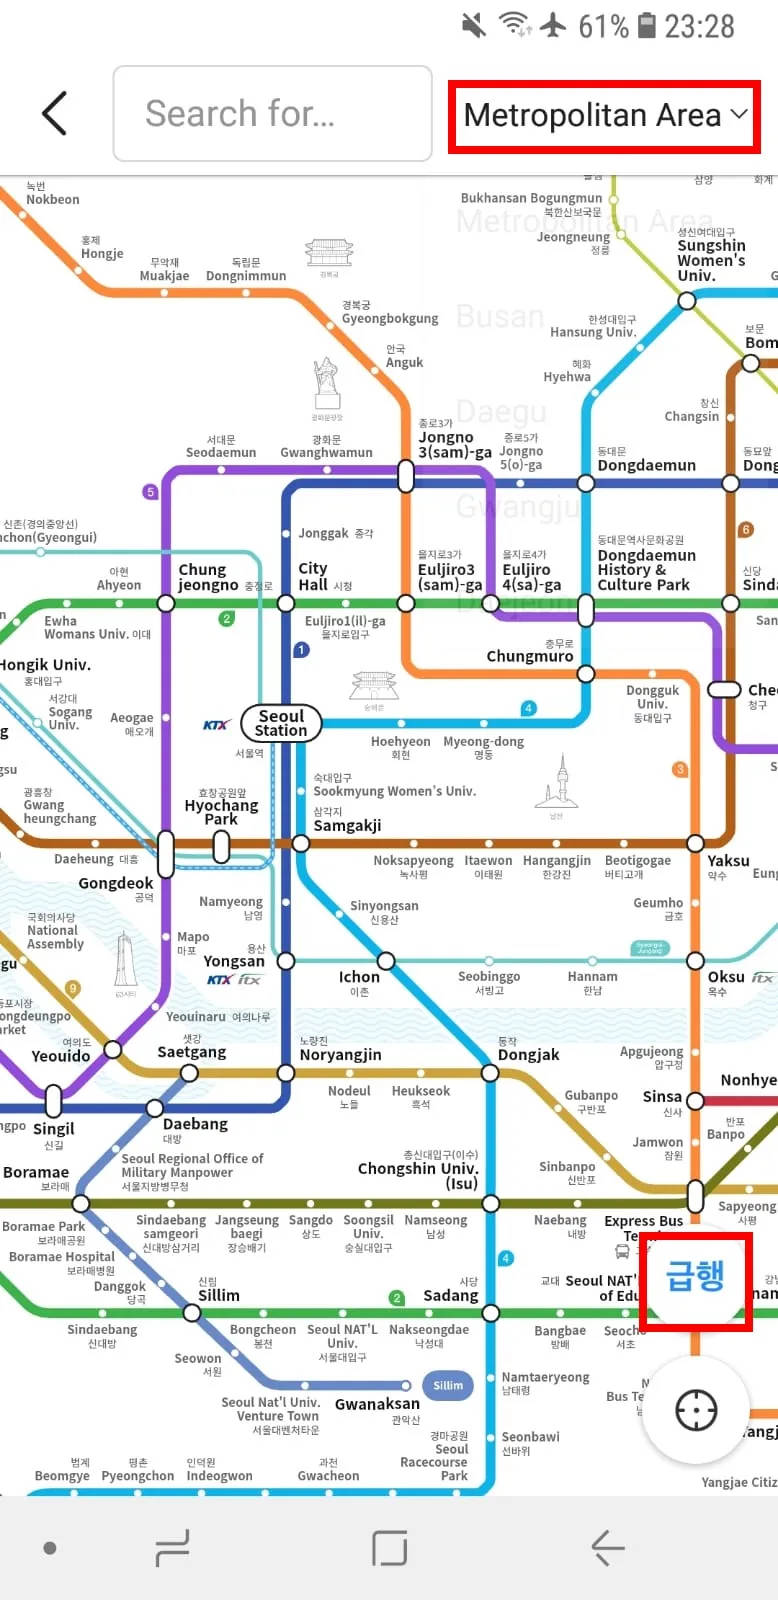 Checking subway maps for Seoul and other cities